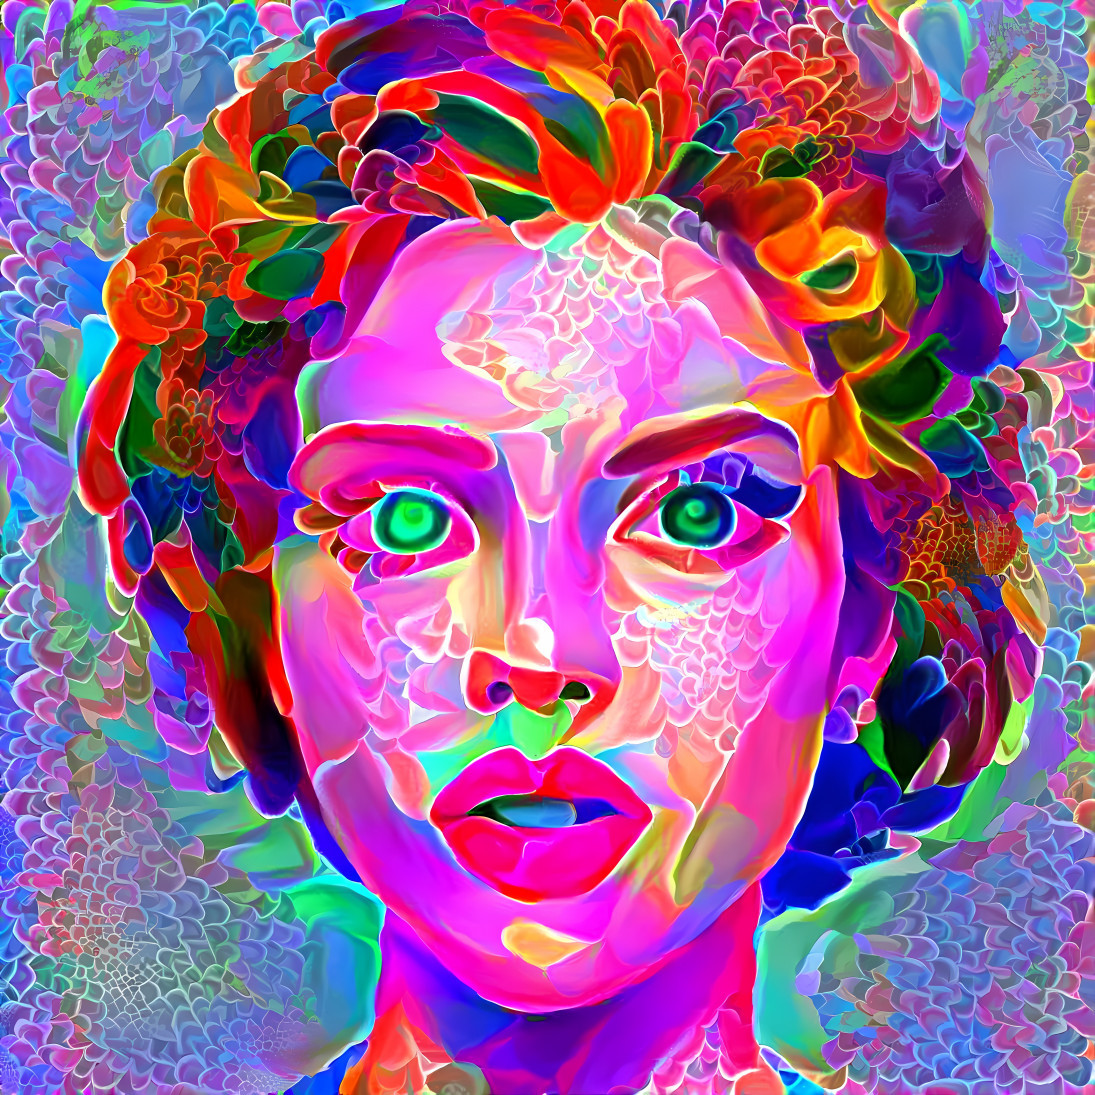 ai, model painting, pink, red, purple, blue, green